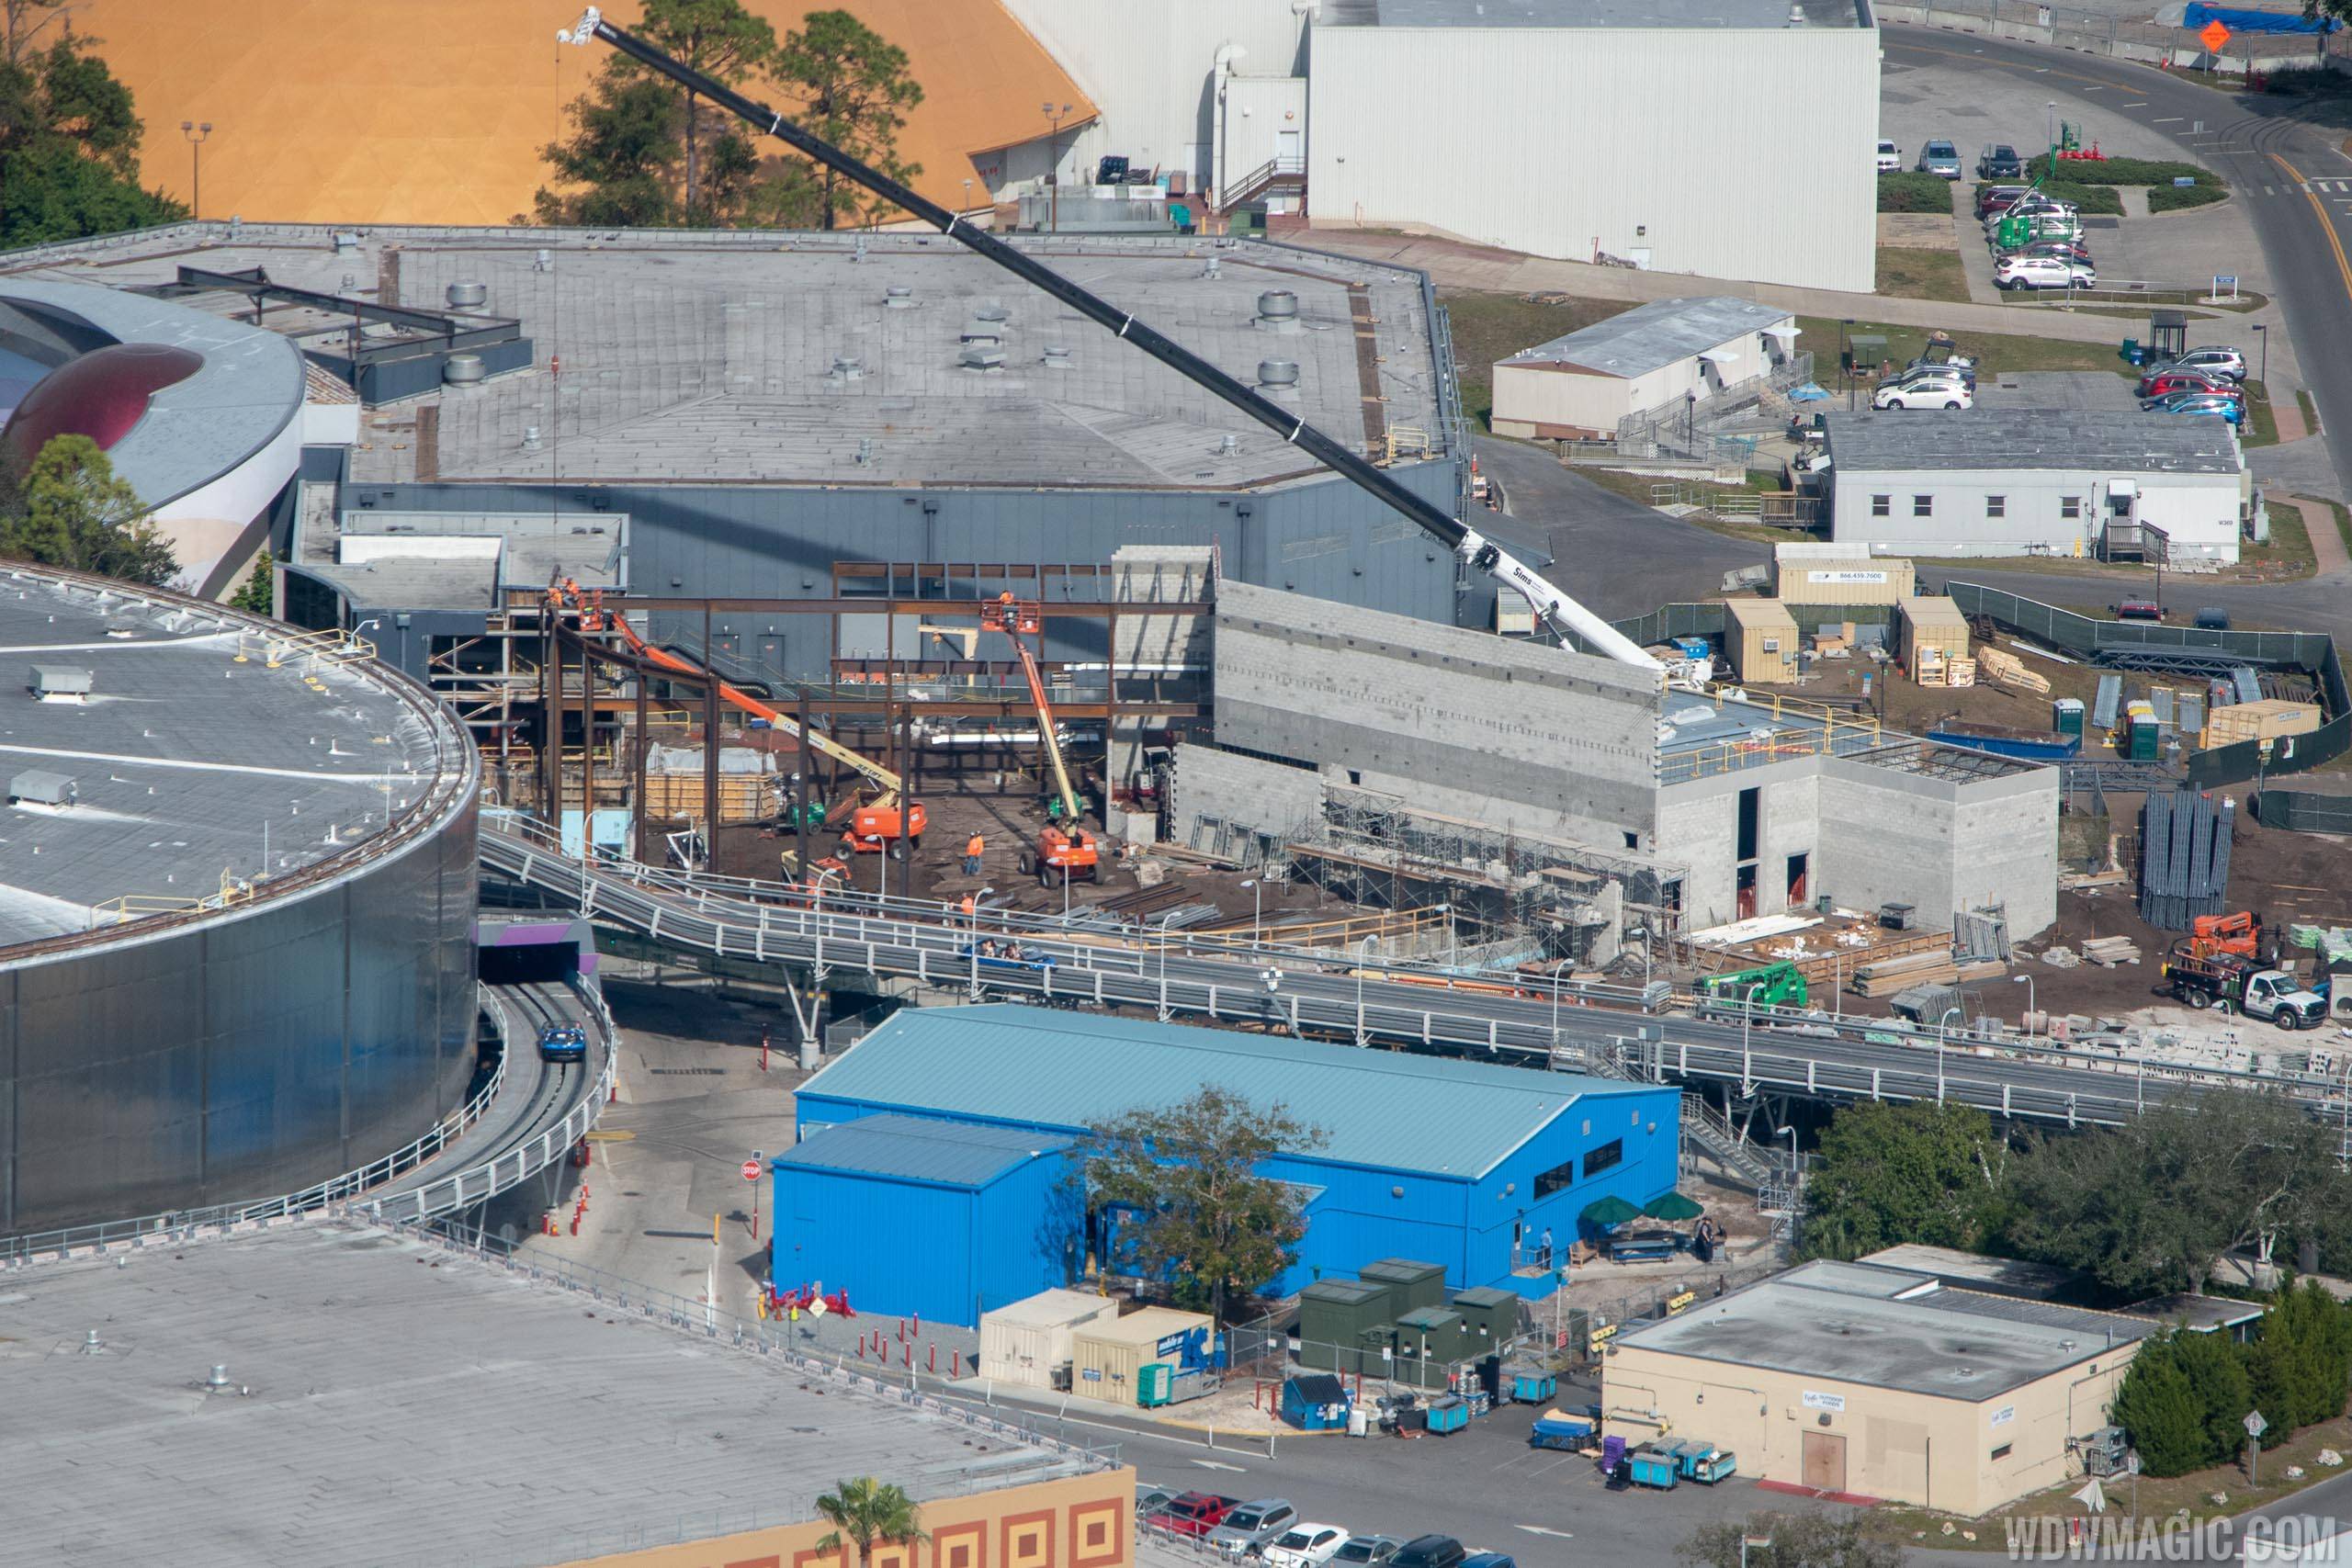 PHOTOS - Epcot's Space-themed restaurant construction update